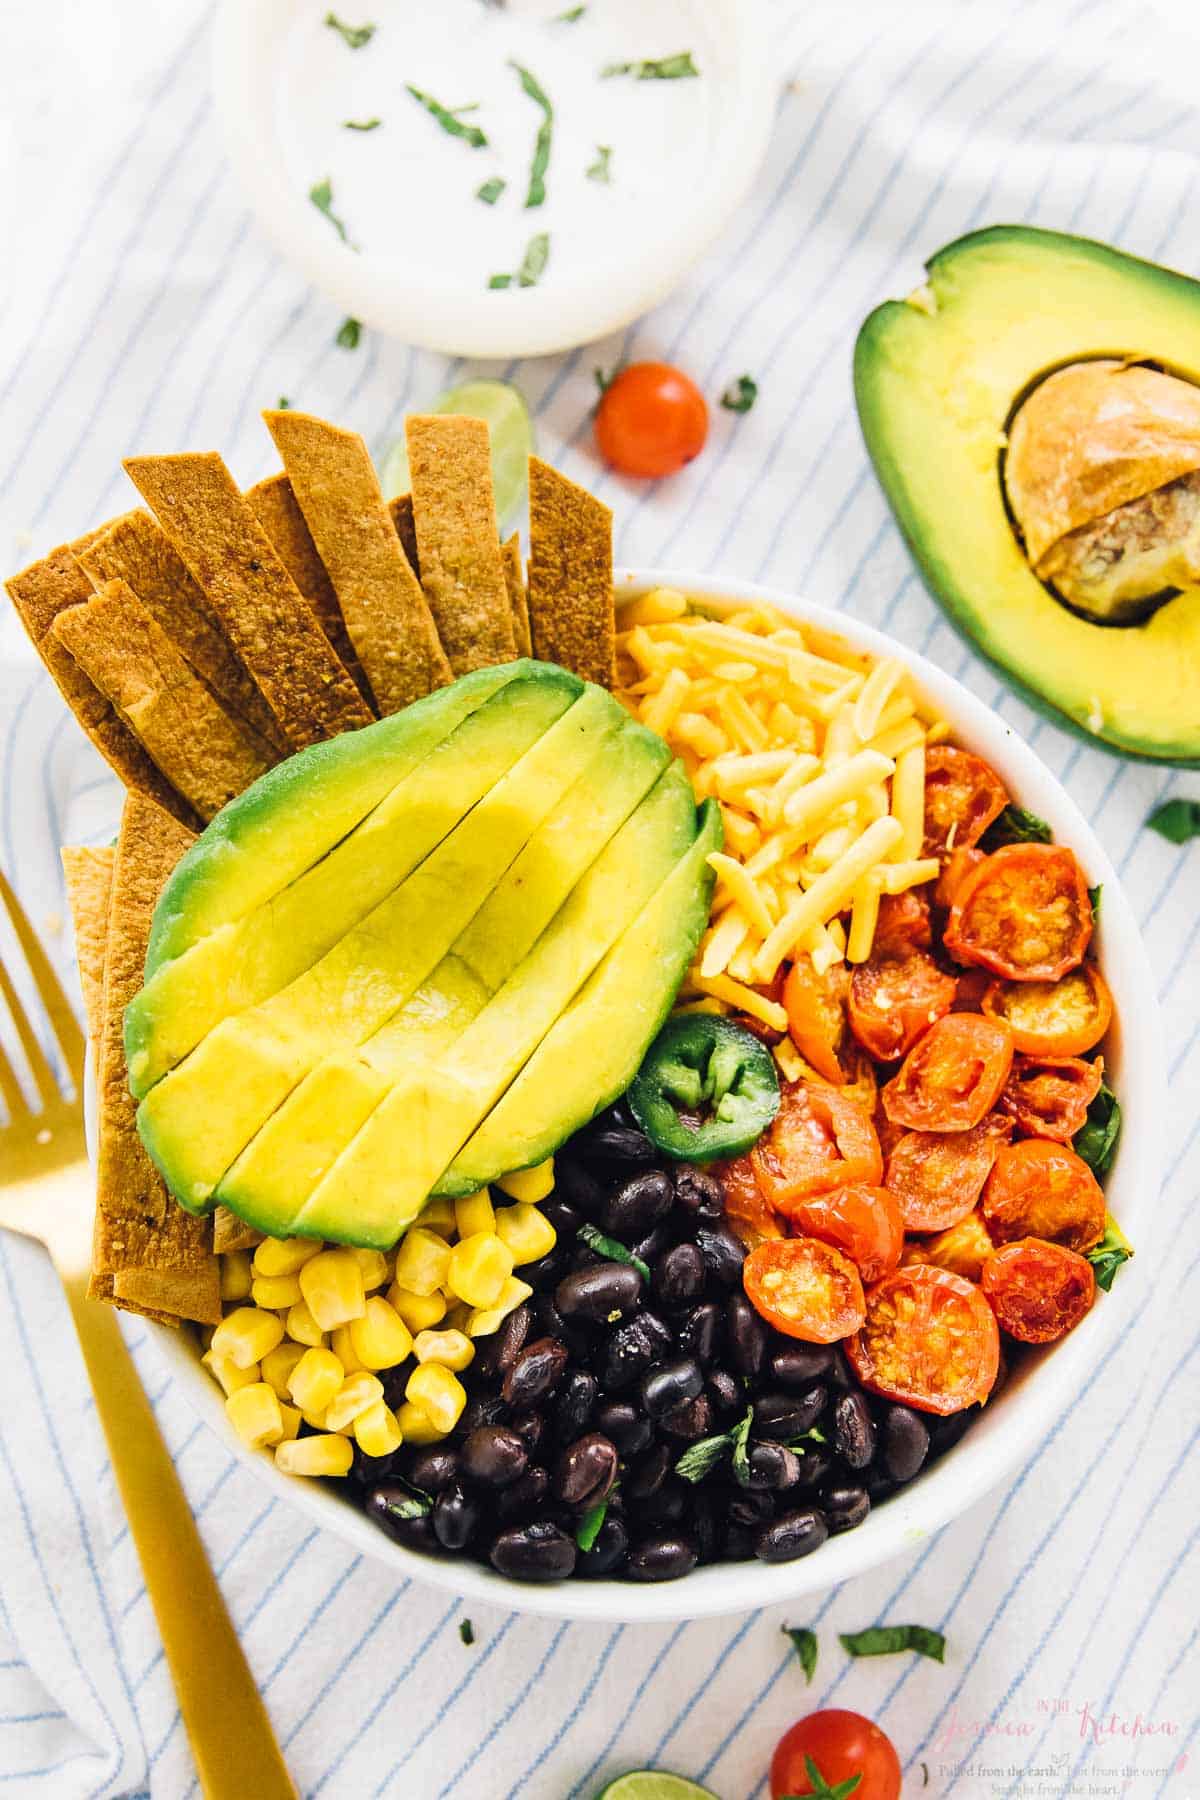 Top down view of a loaded taco salad bowl, topped with sliced avocado.